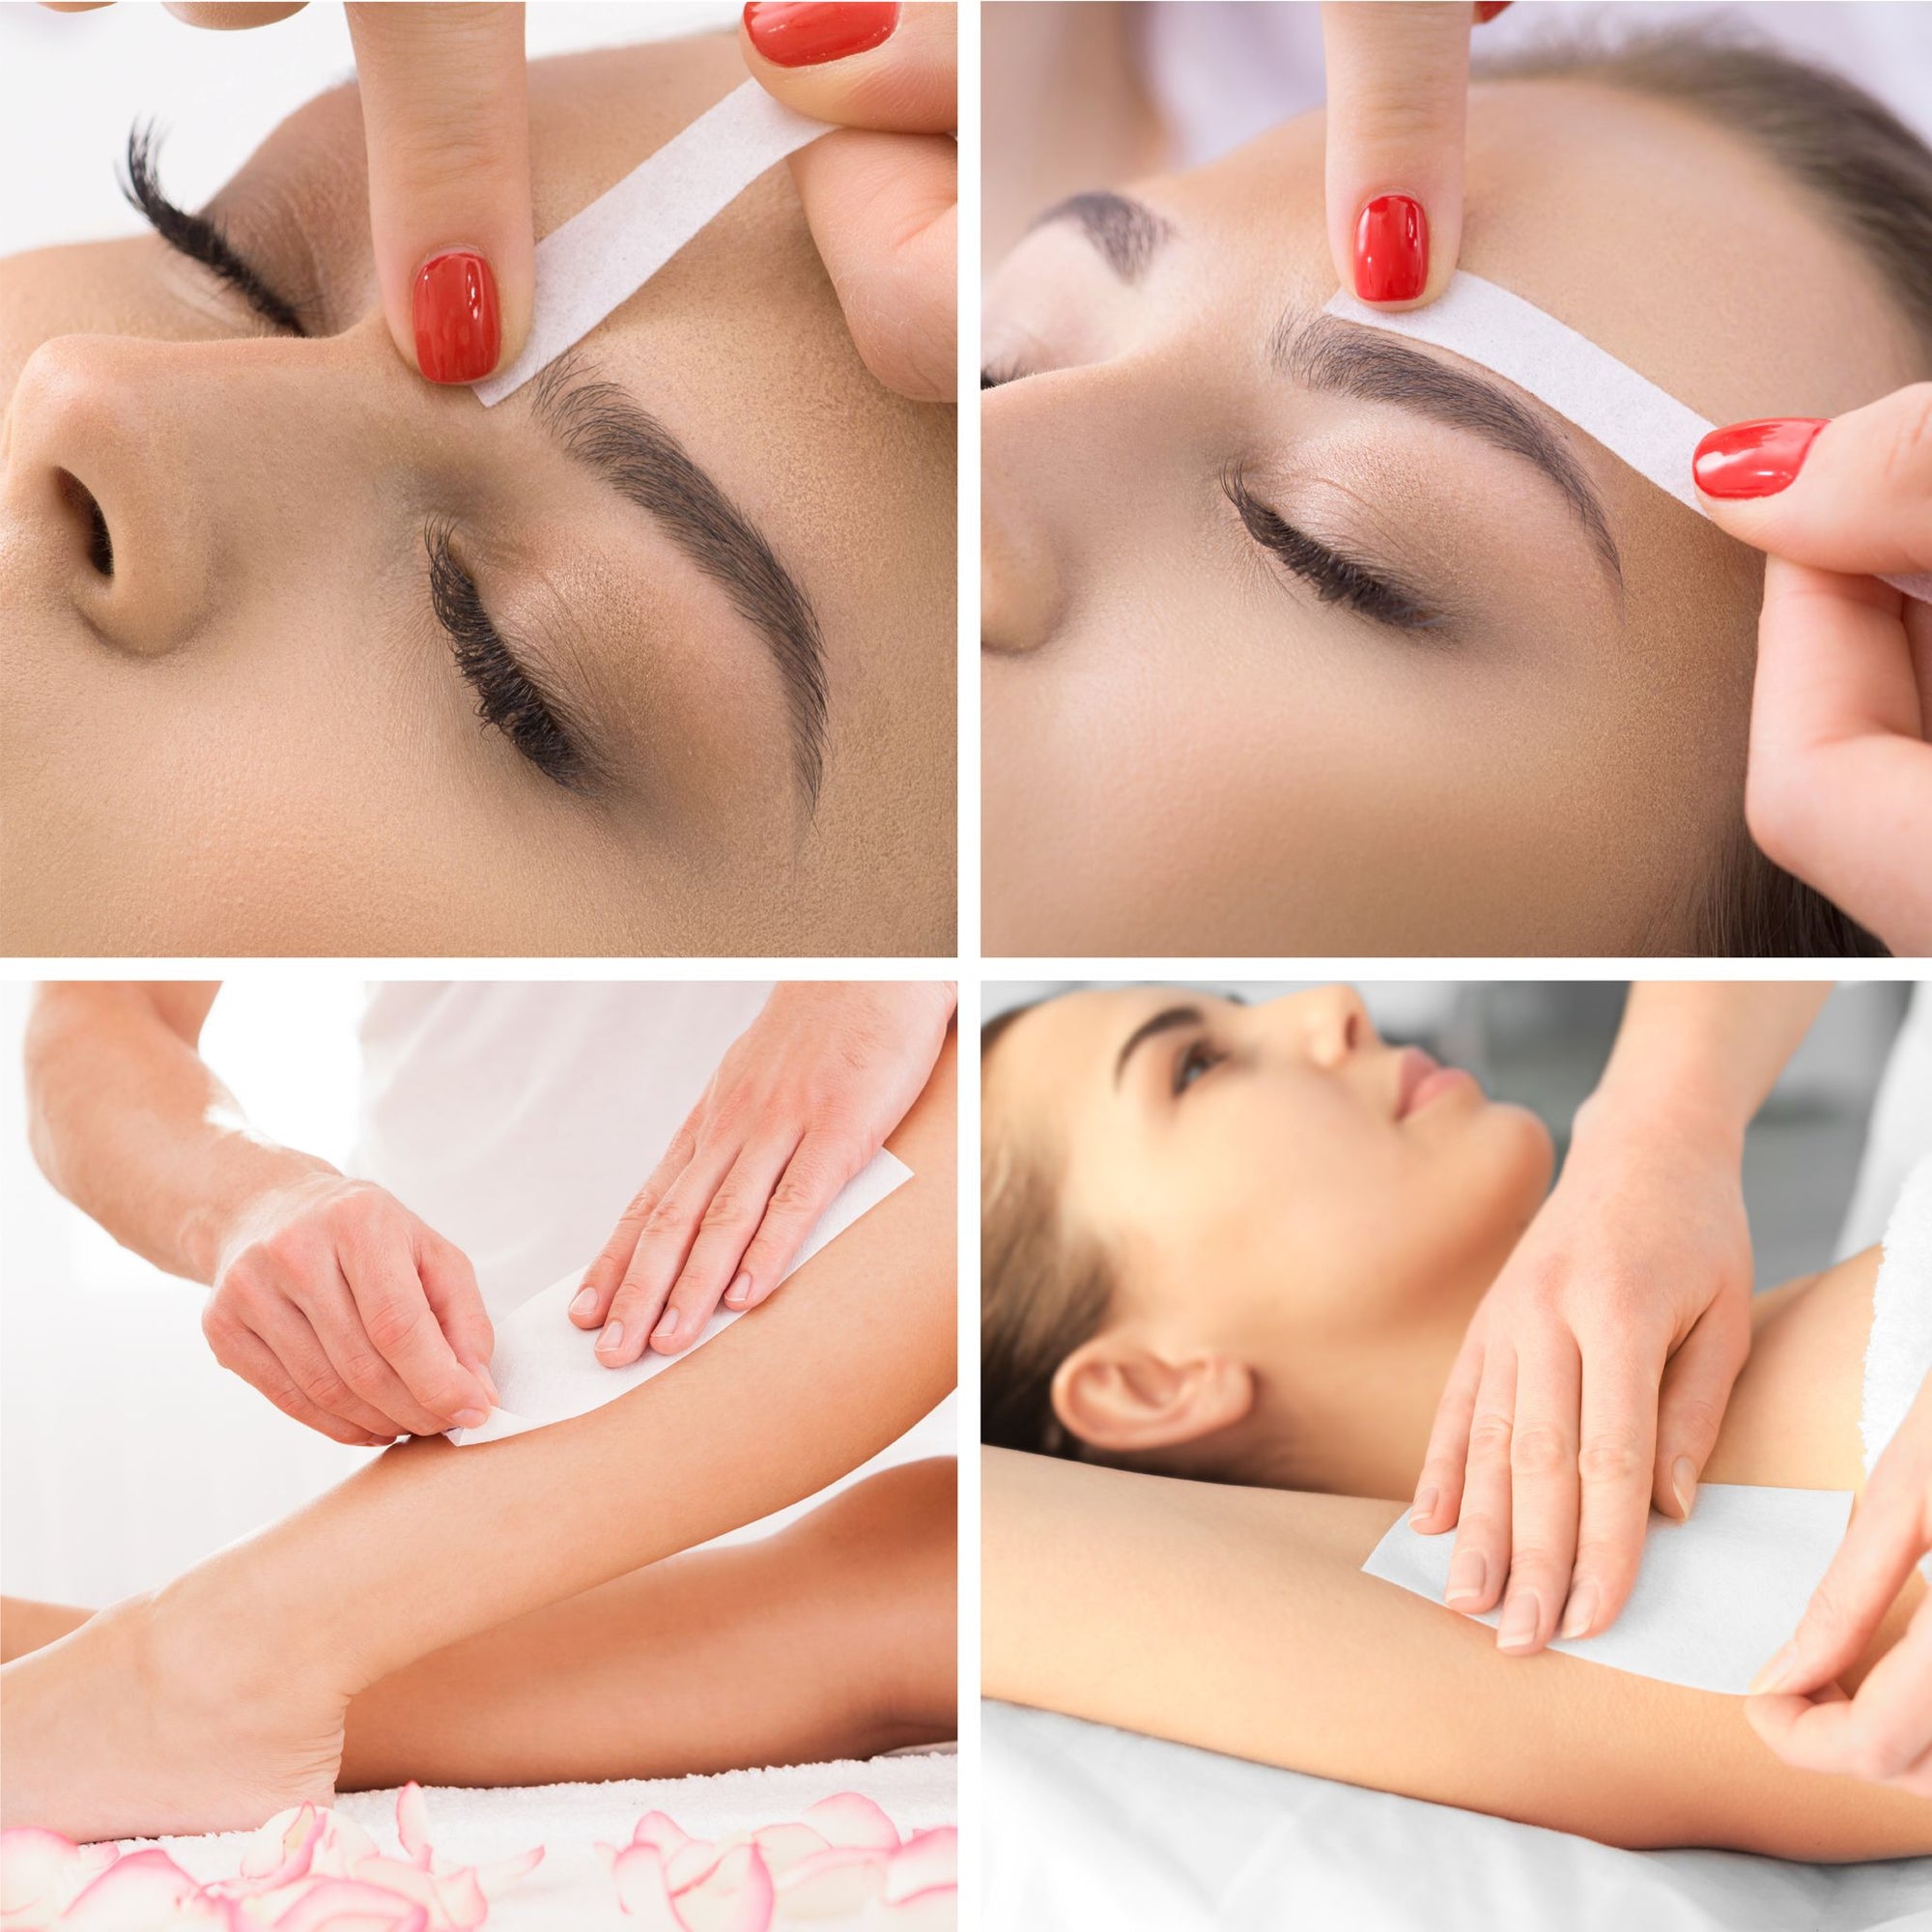 series of images showing lady having different areas of body professionally waxed using total body waxing kit including eyebrows legs and underarms